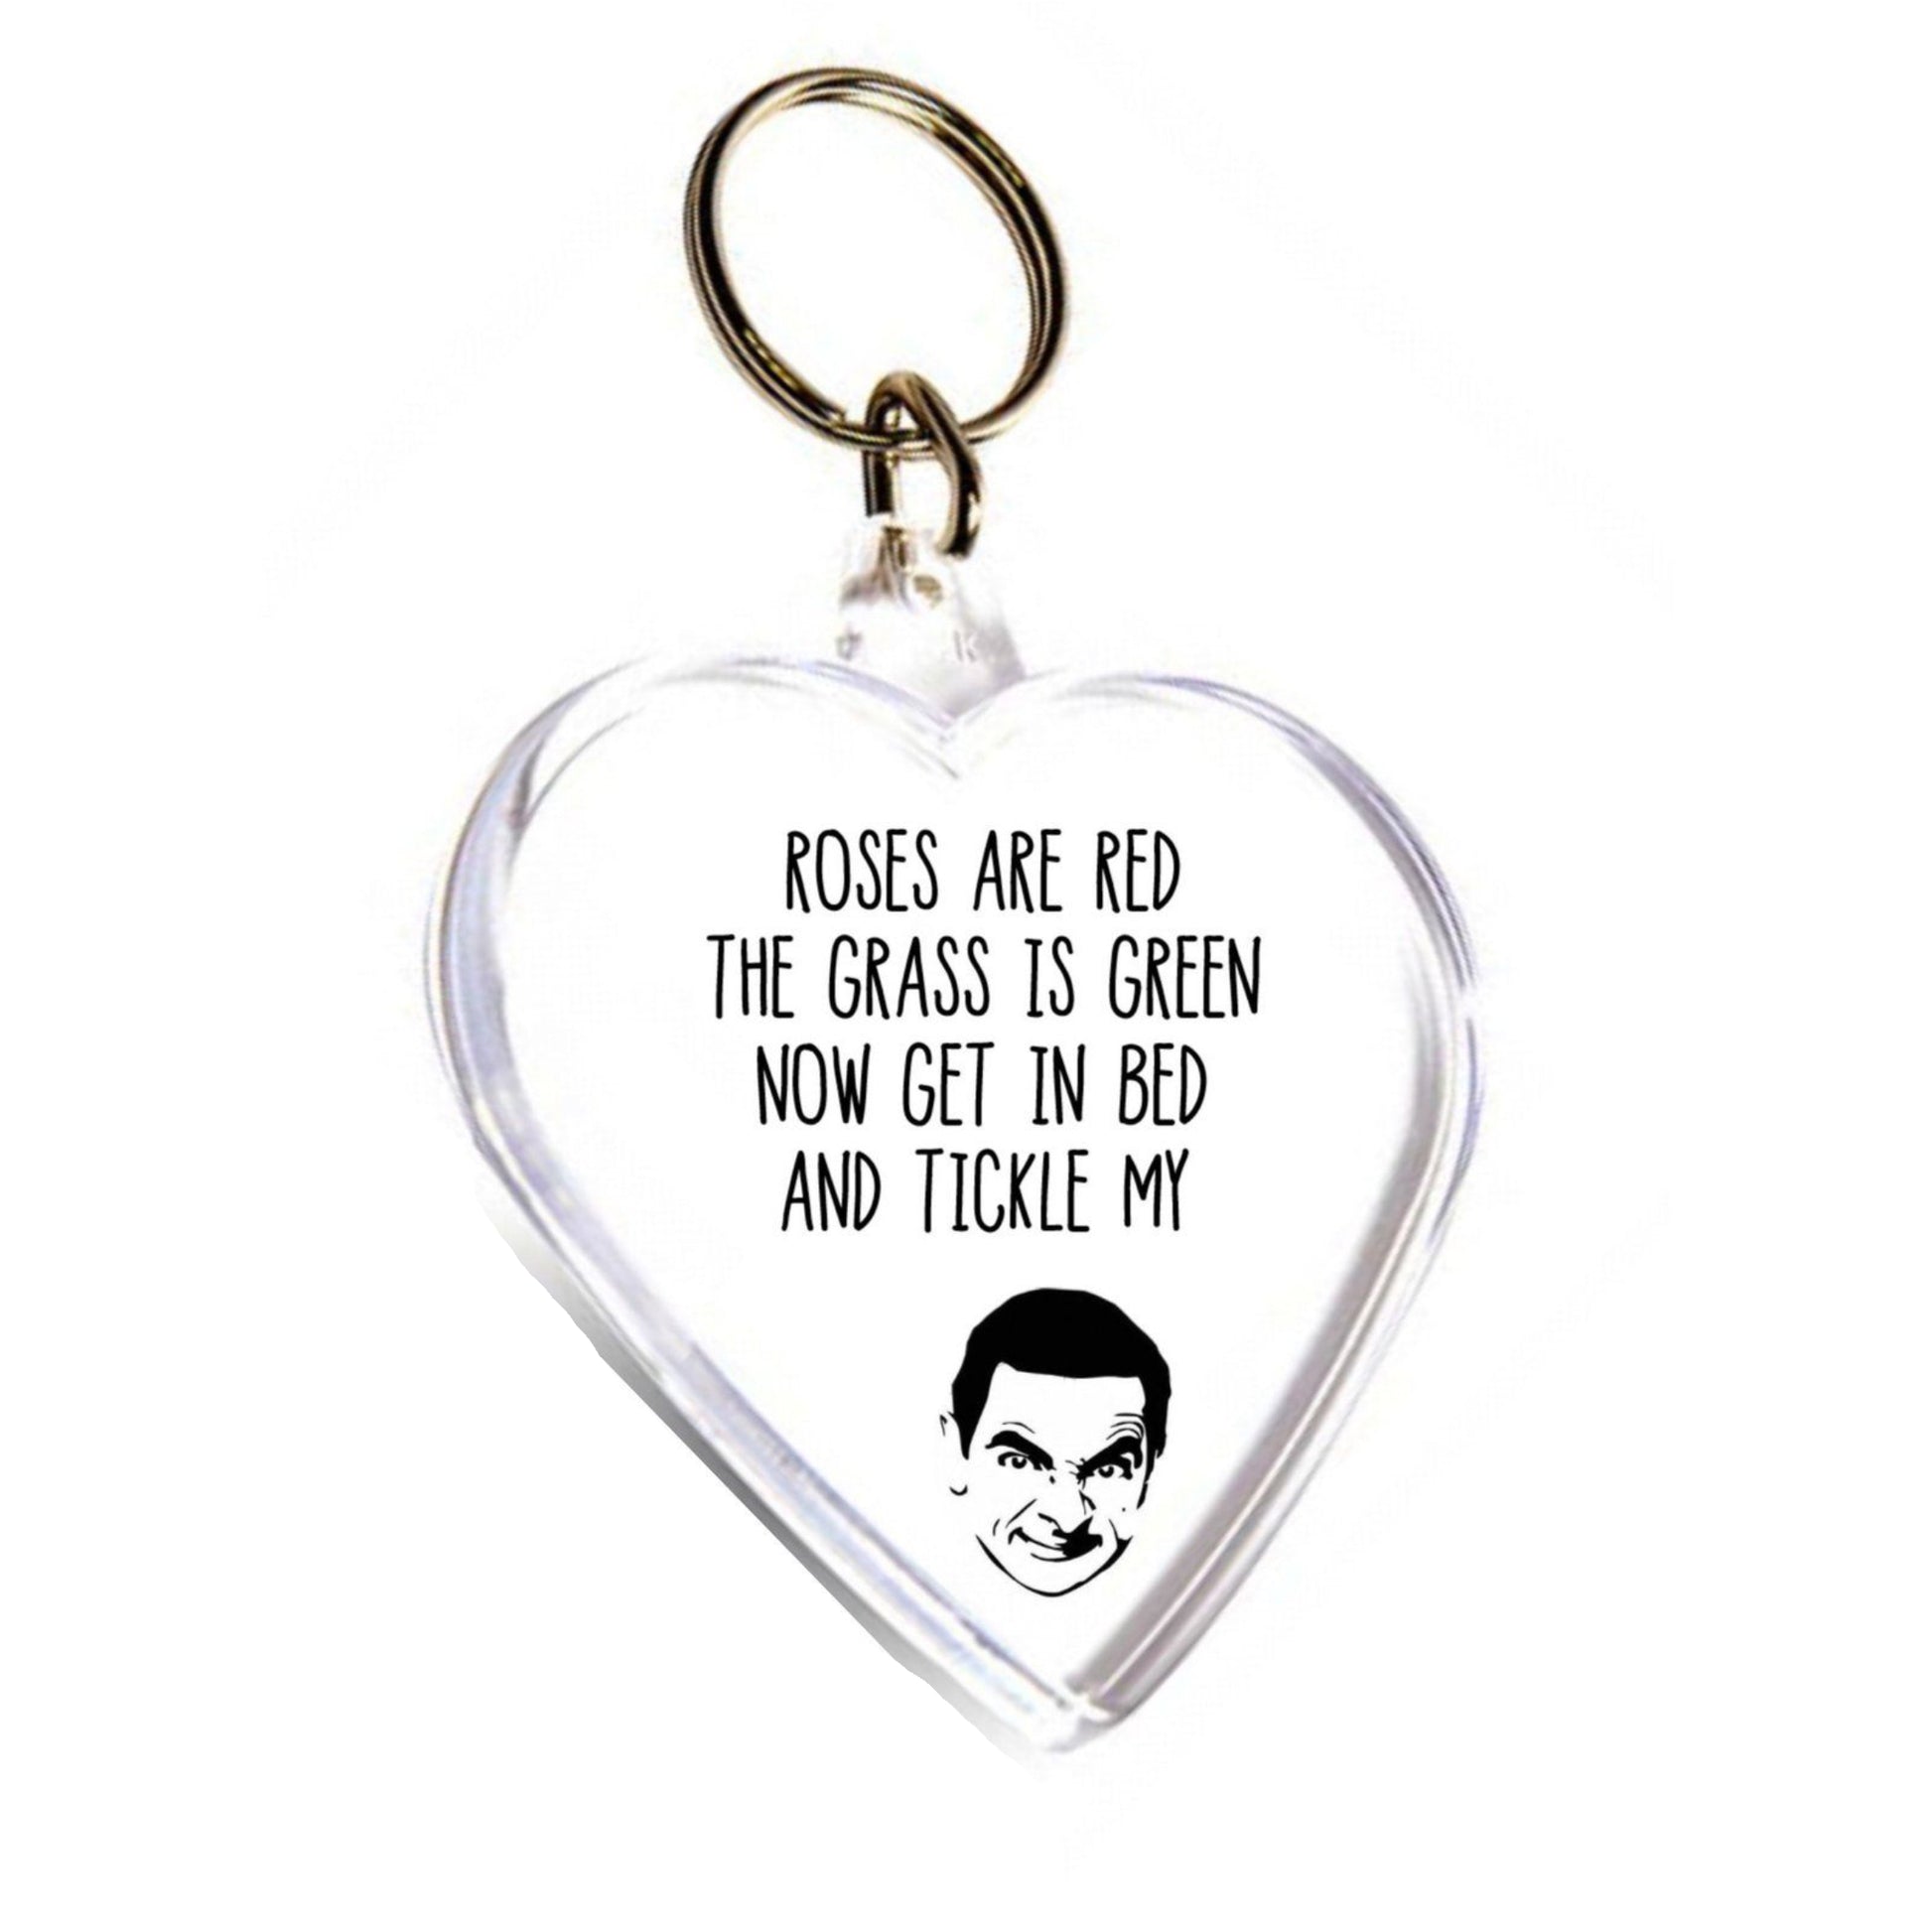 Acrylic heart shape key ring featuring a silhouette of Mr Bean. To the top it reads 'roses are red, the grass is green, get in bed & tickle my...'. Printed in black ink.